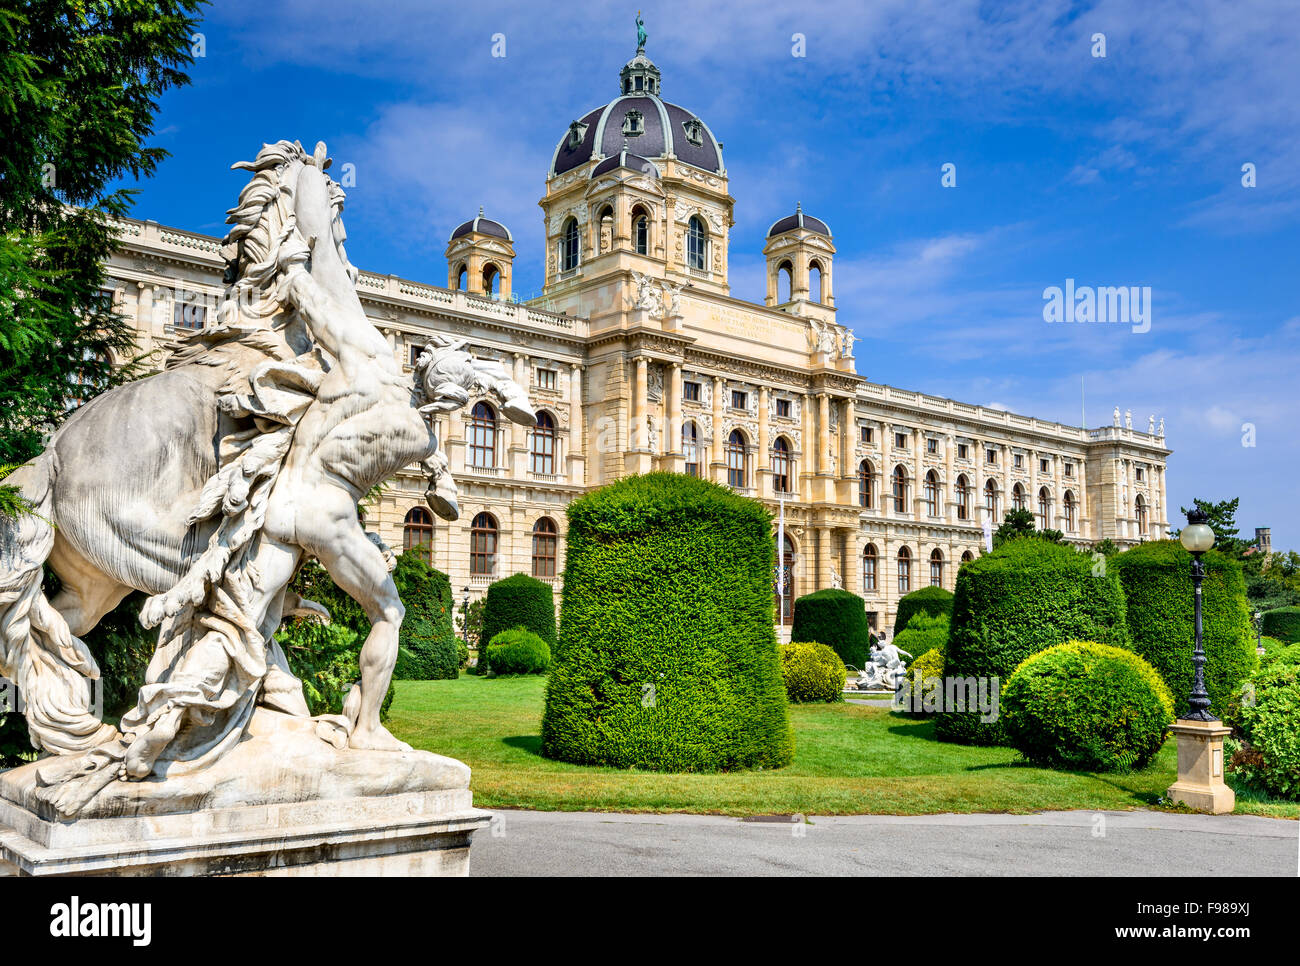 Vienna, Austria. Beautiful view of famous Naturhistorisches Museum (Natural History Museum) with park Maria-Theresien-Platz. Stock Photo